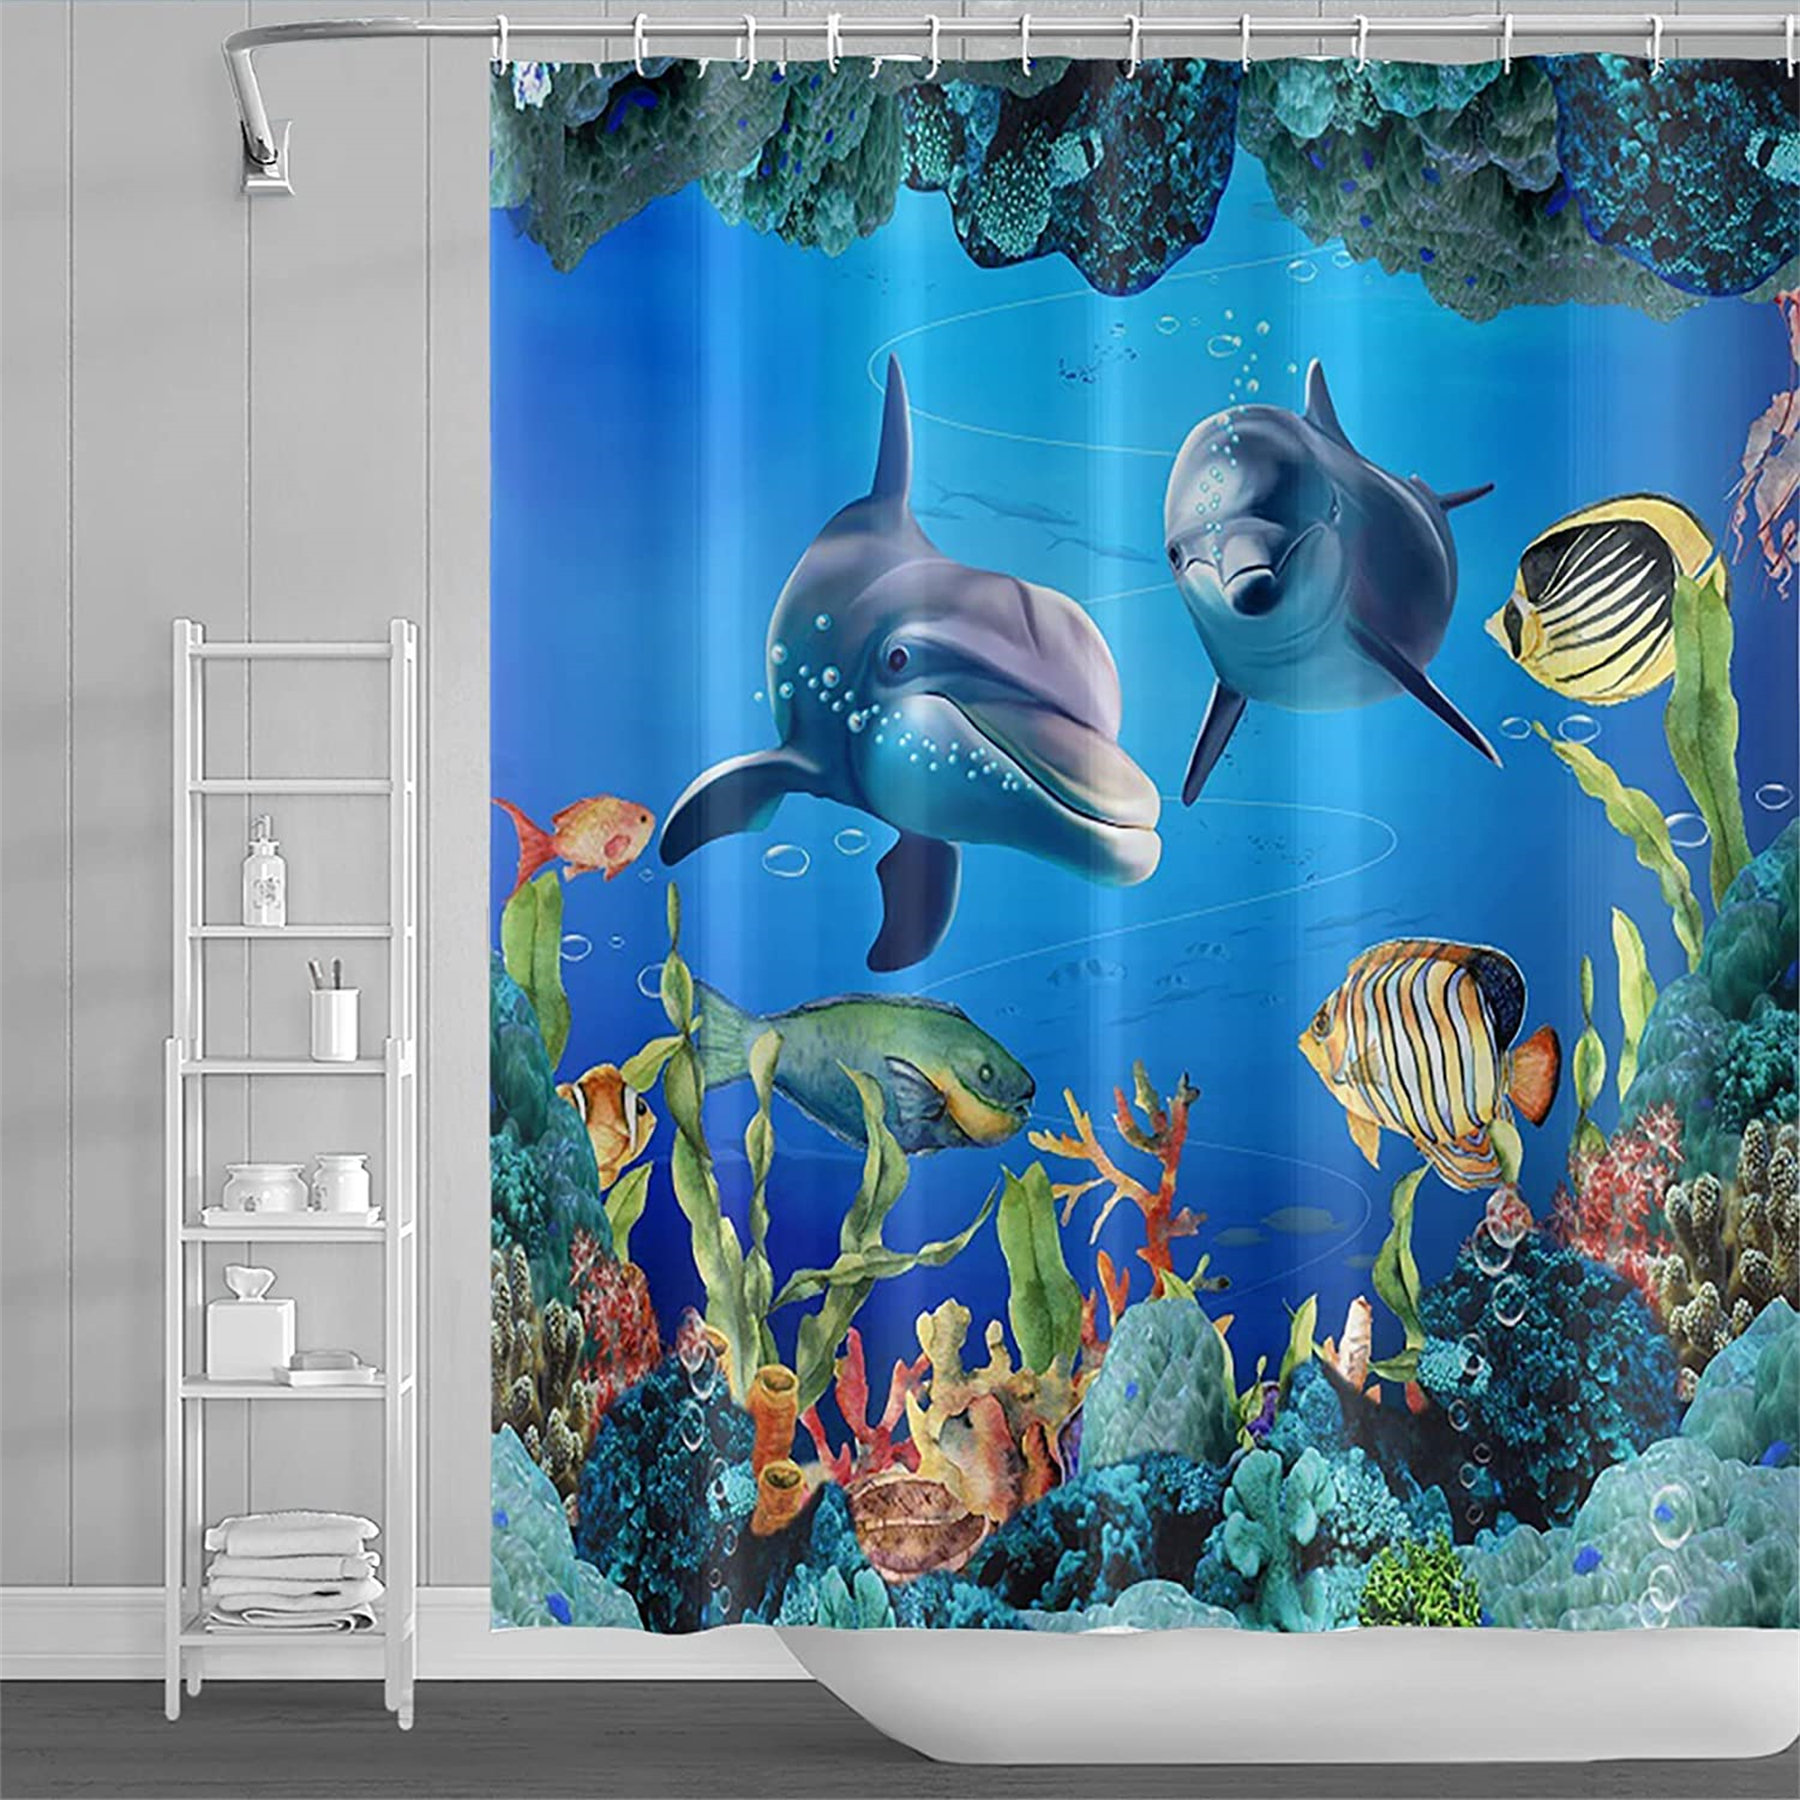 Details about   Bathroom Shower Curtain with Cute Dolphin Fish in the Blue Ocean Pattern 511 